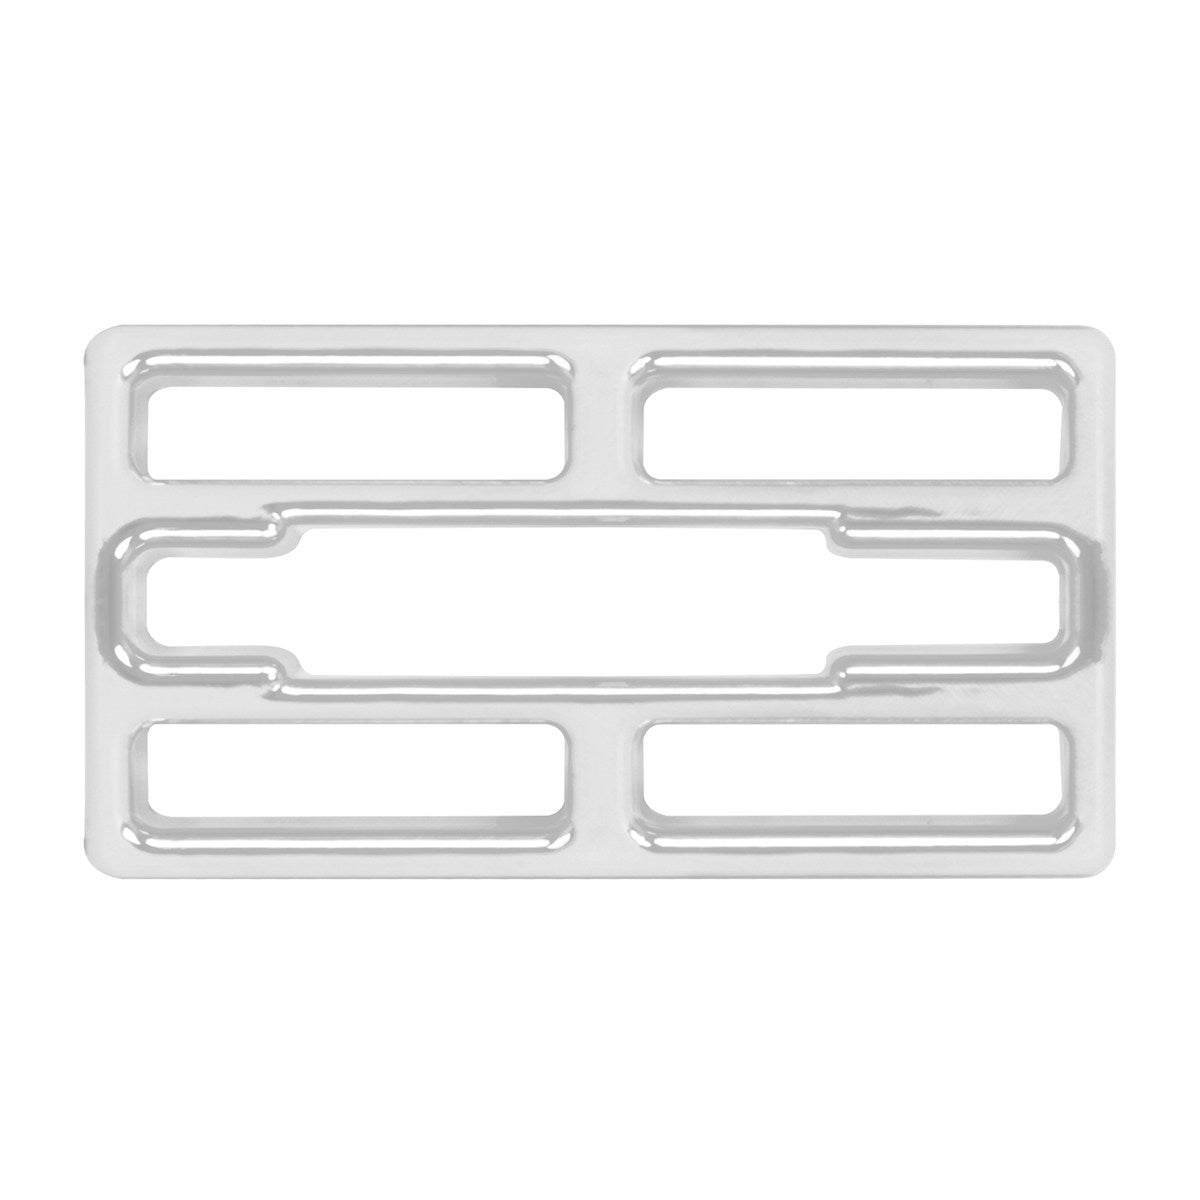 SMALL A/C VENT COVER FOR KENWORTH W